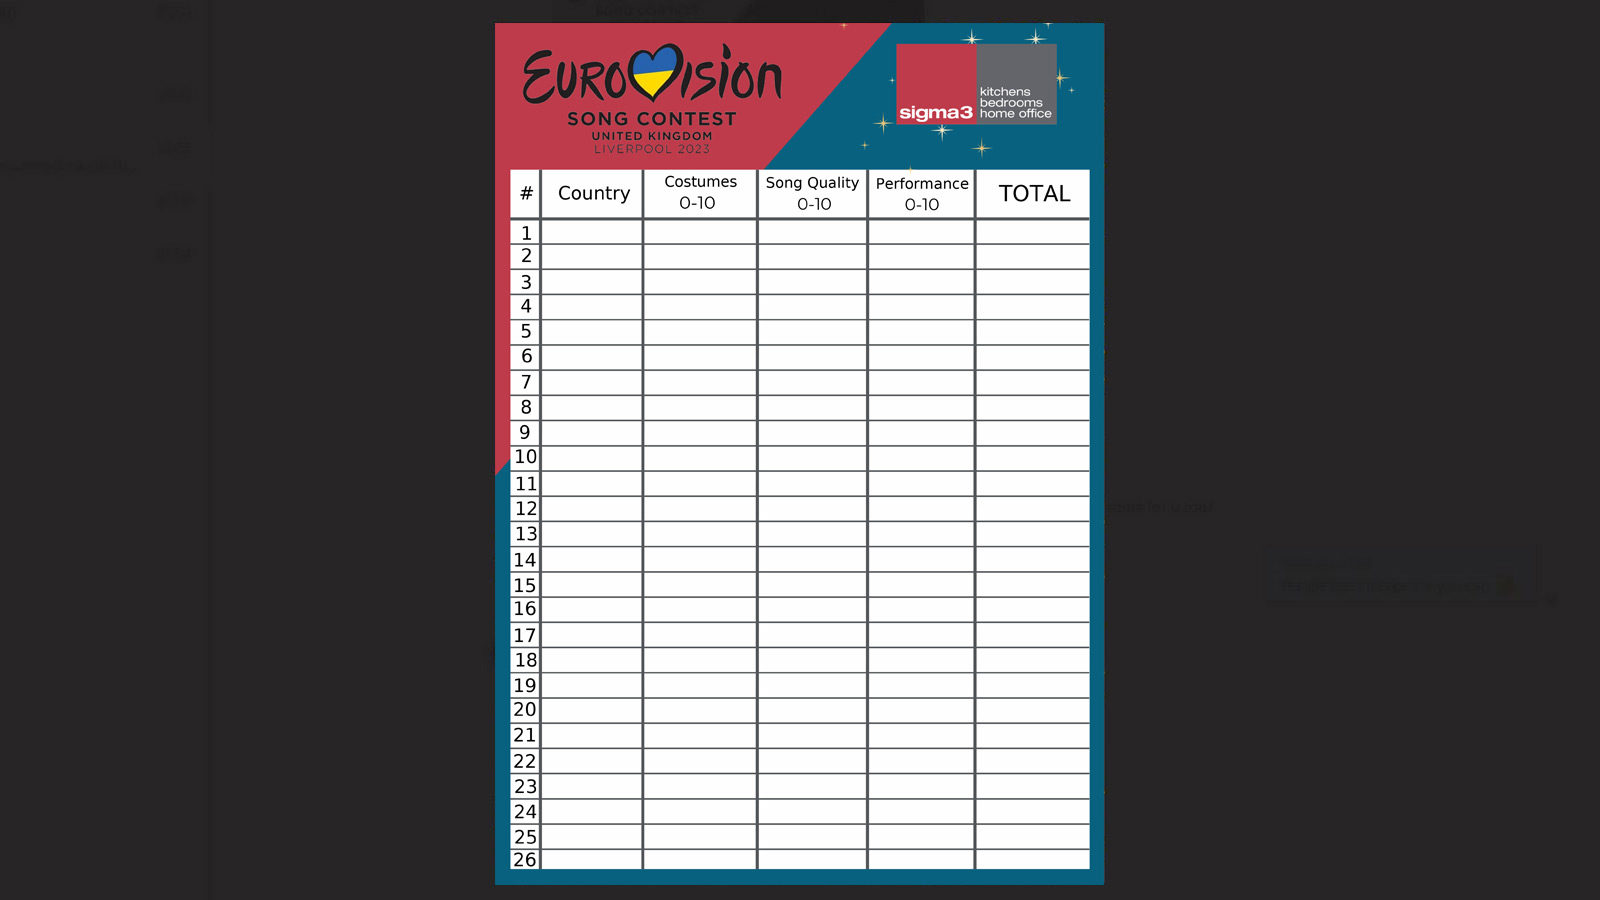 A Sigma 3 Kitchens Eurovision Song Contest 2023 Score Card